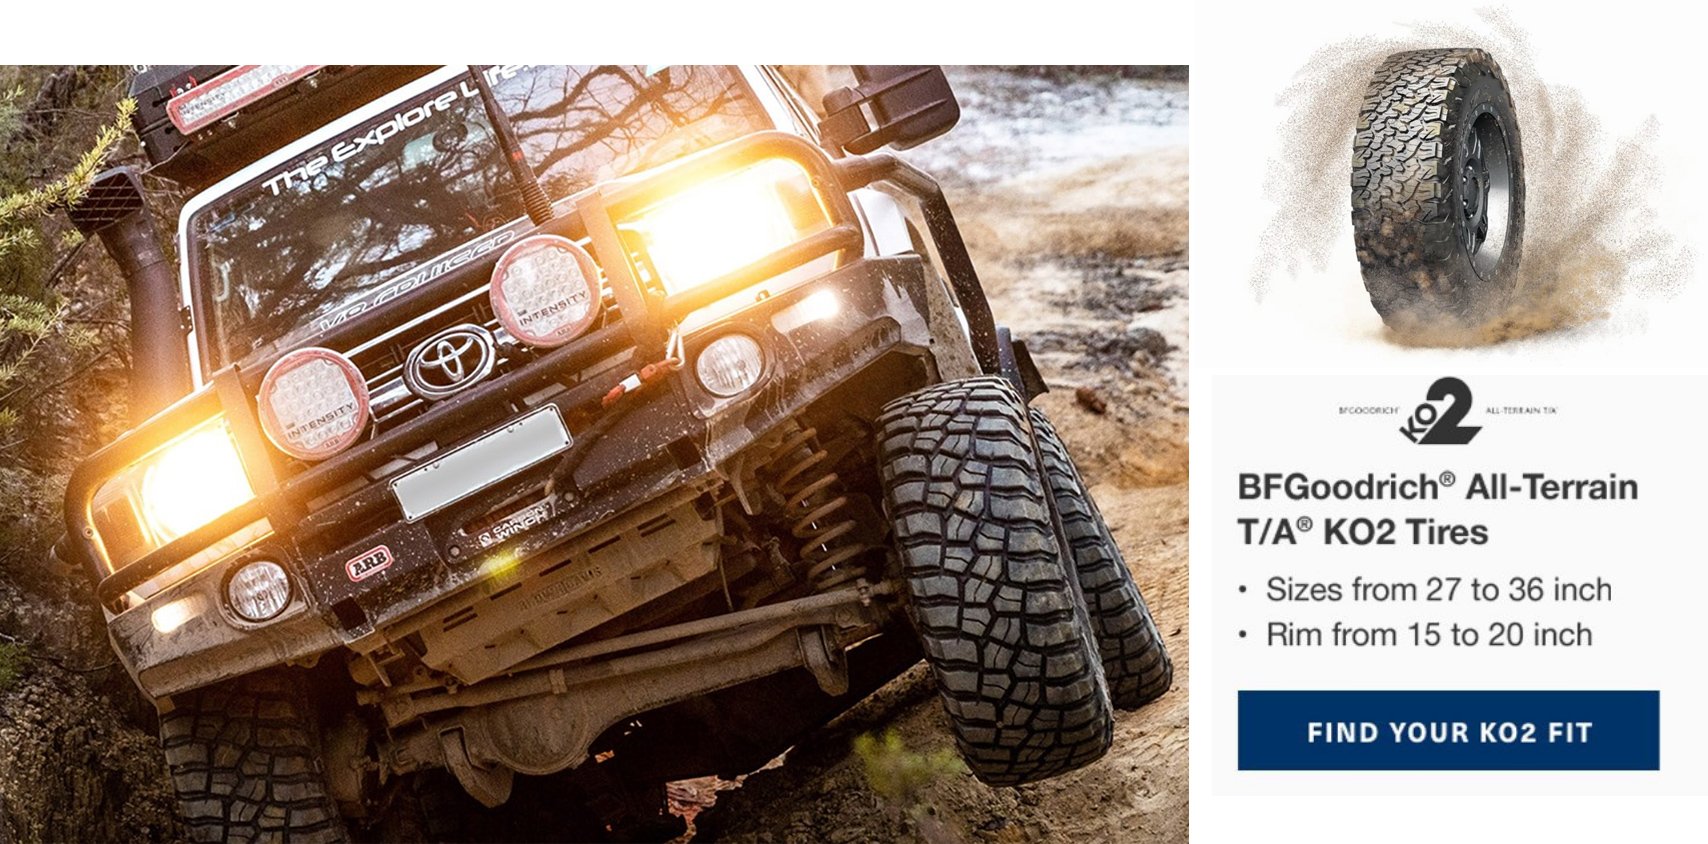 Shop The Largest Selection of BFGoodrich KO2 Tires